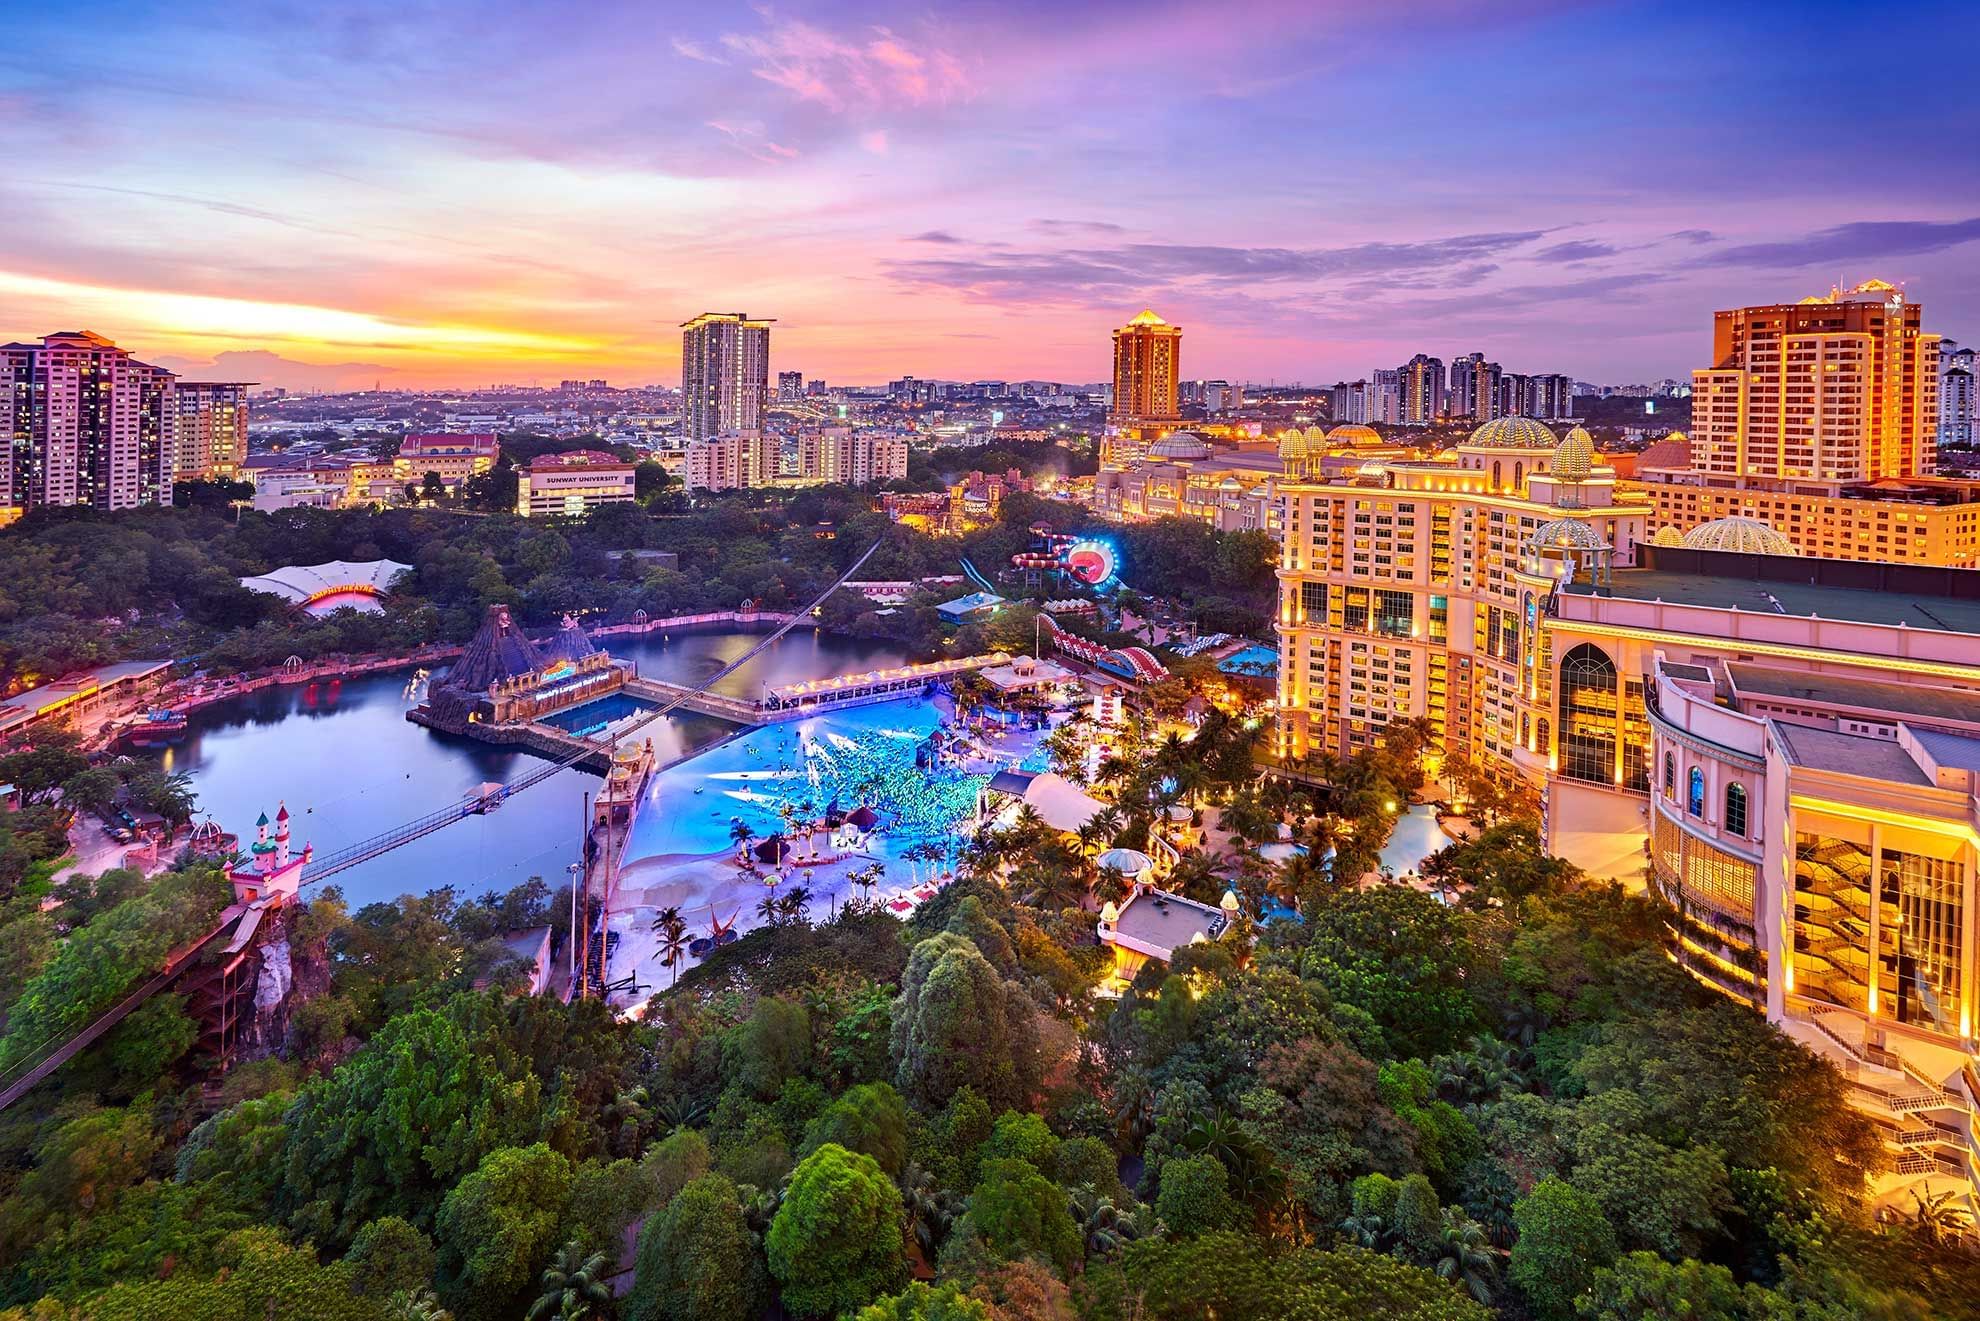 Aerial view of the Sunway Lagoon Hotel with its surroundings